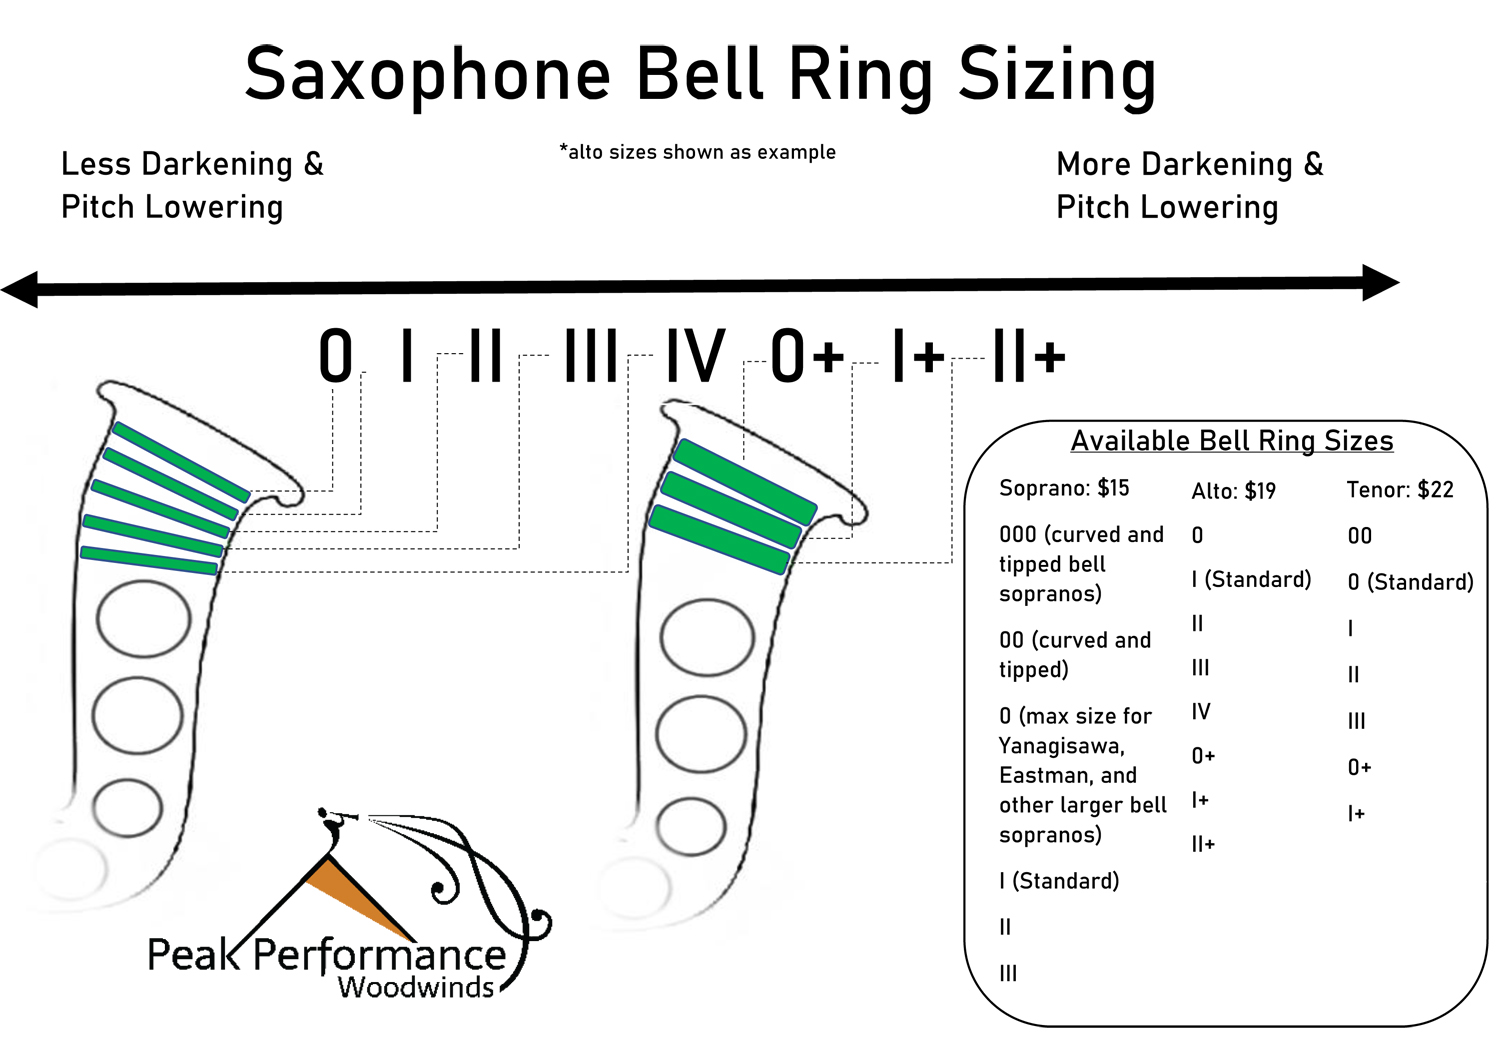 Bell Ring Sizing at Peak Performance Woodwinds